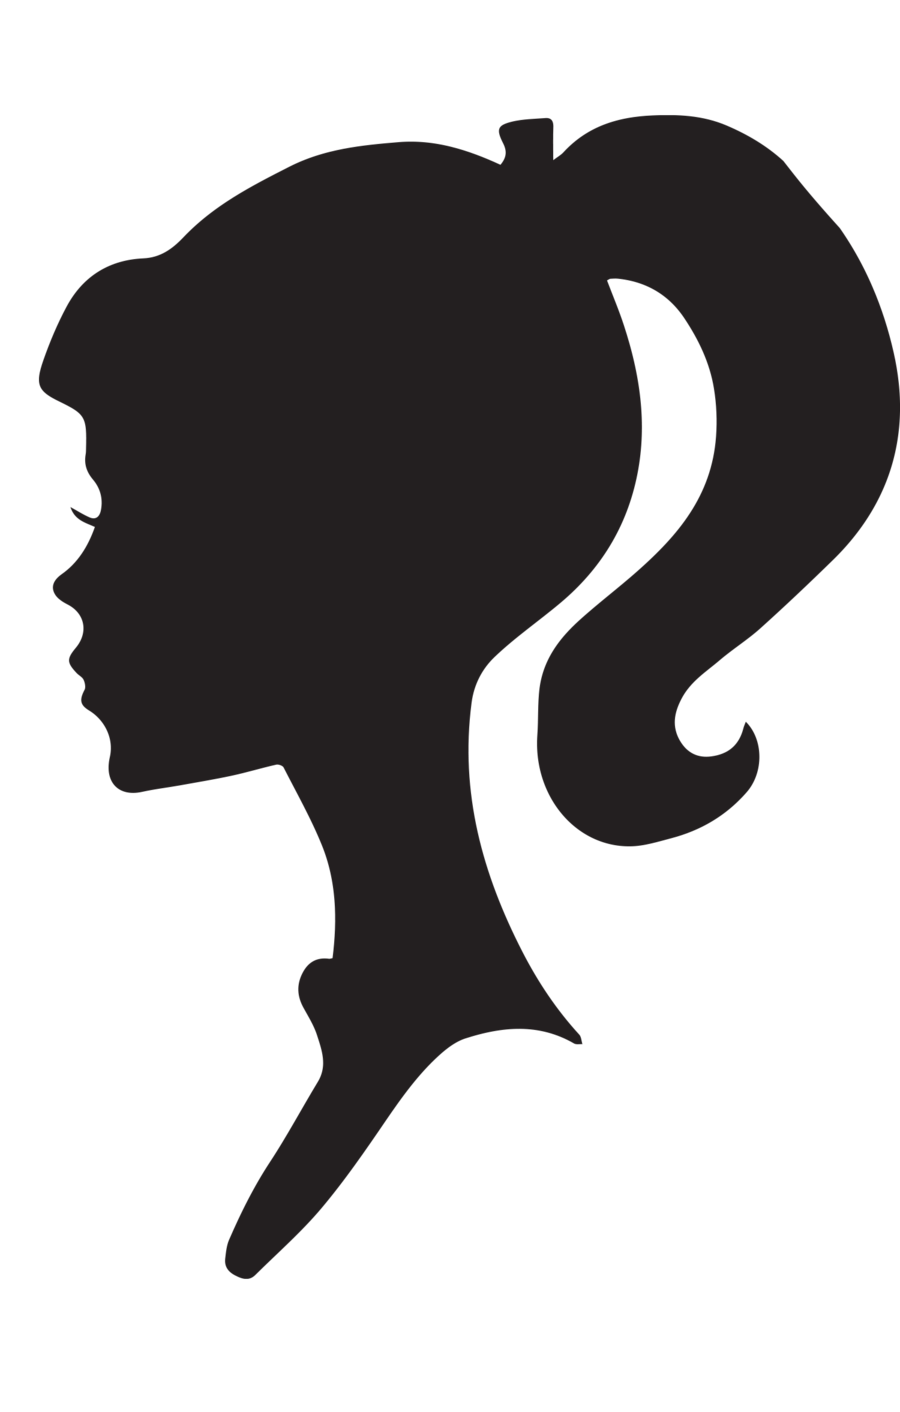 Clipart library: More Like Male Silhouette Profile by snicklefritz-stock